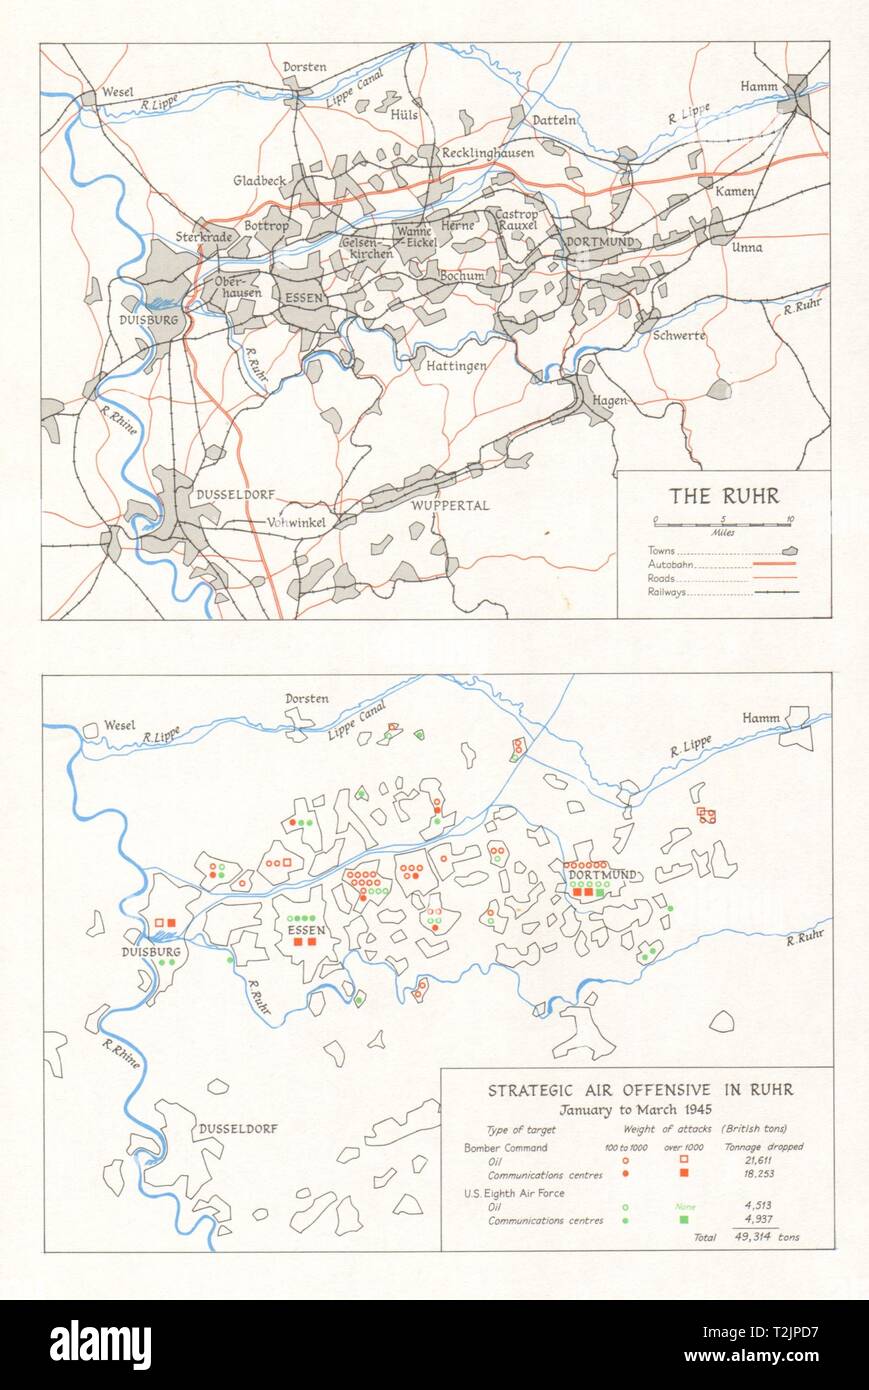 Strategic Air Offensive in Ruhr, Jan-March 1945 USAF RAF Bomber Command 1968 map Stock Photo